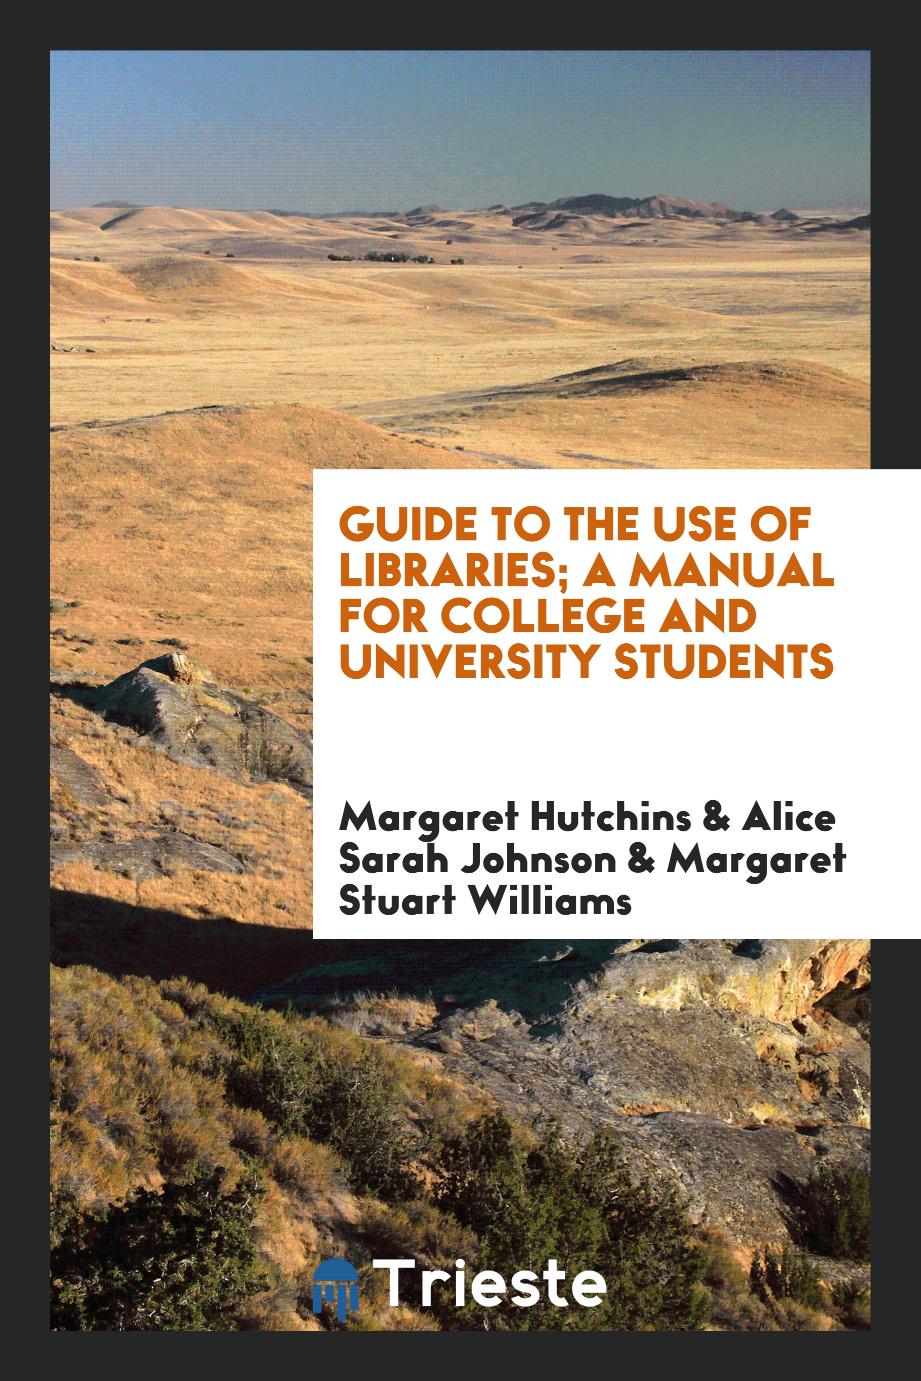 Guide to the use of libraries; a manual for college and university students